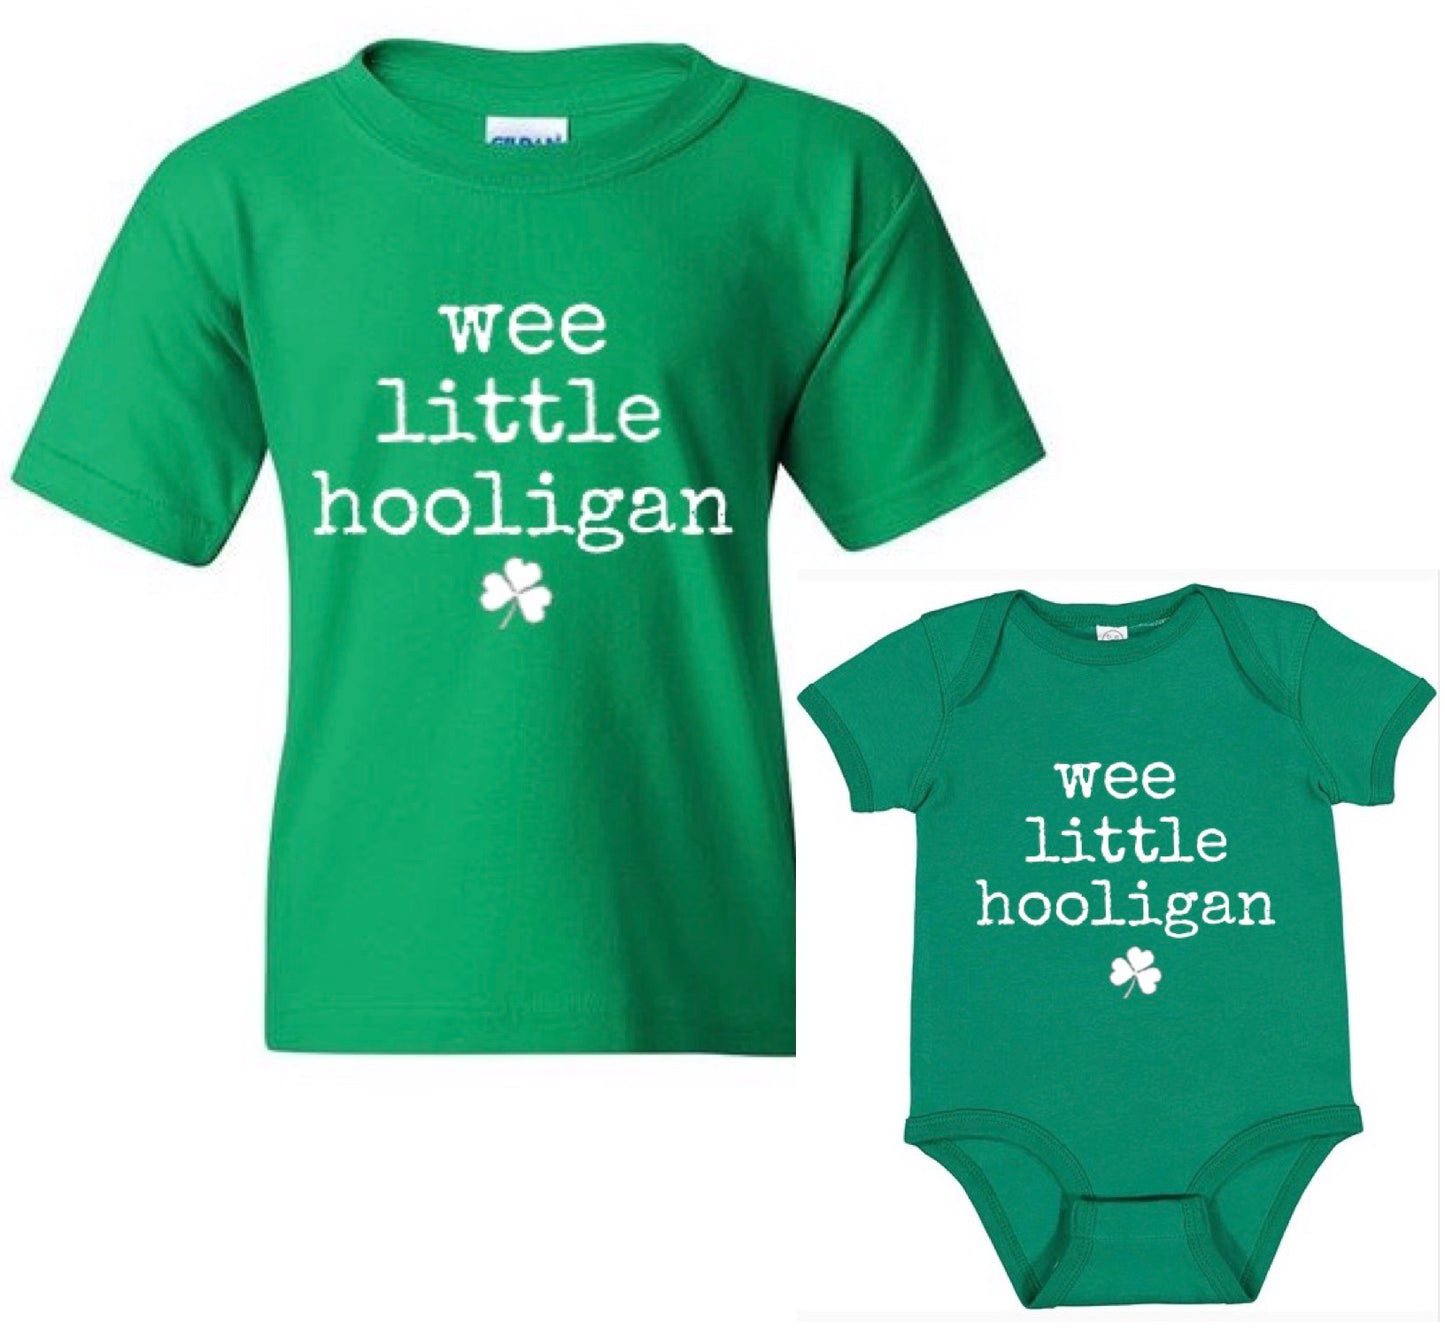 Wee Little Hooligan, Youth Shirt (FREE Shipping)